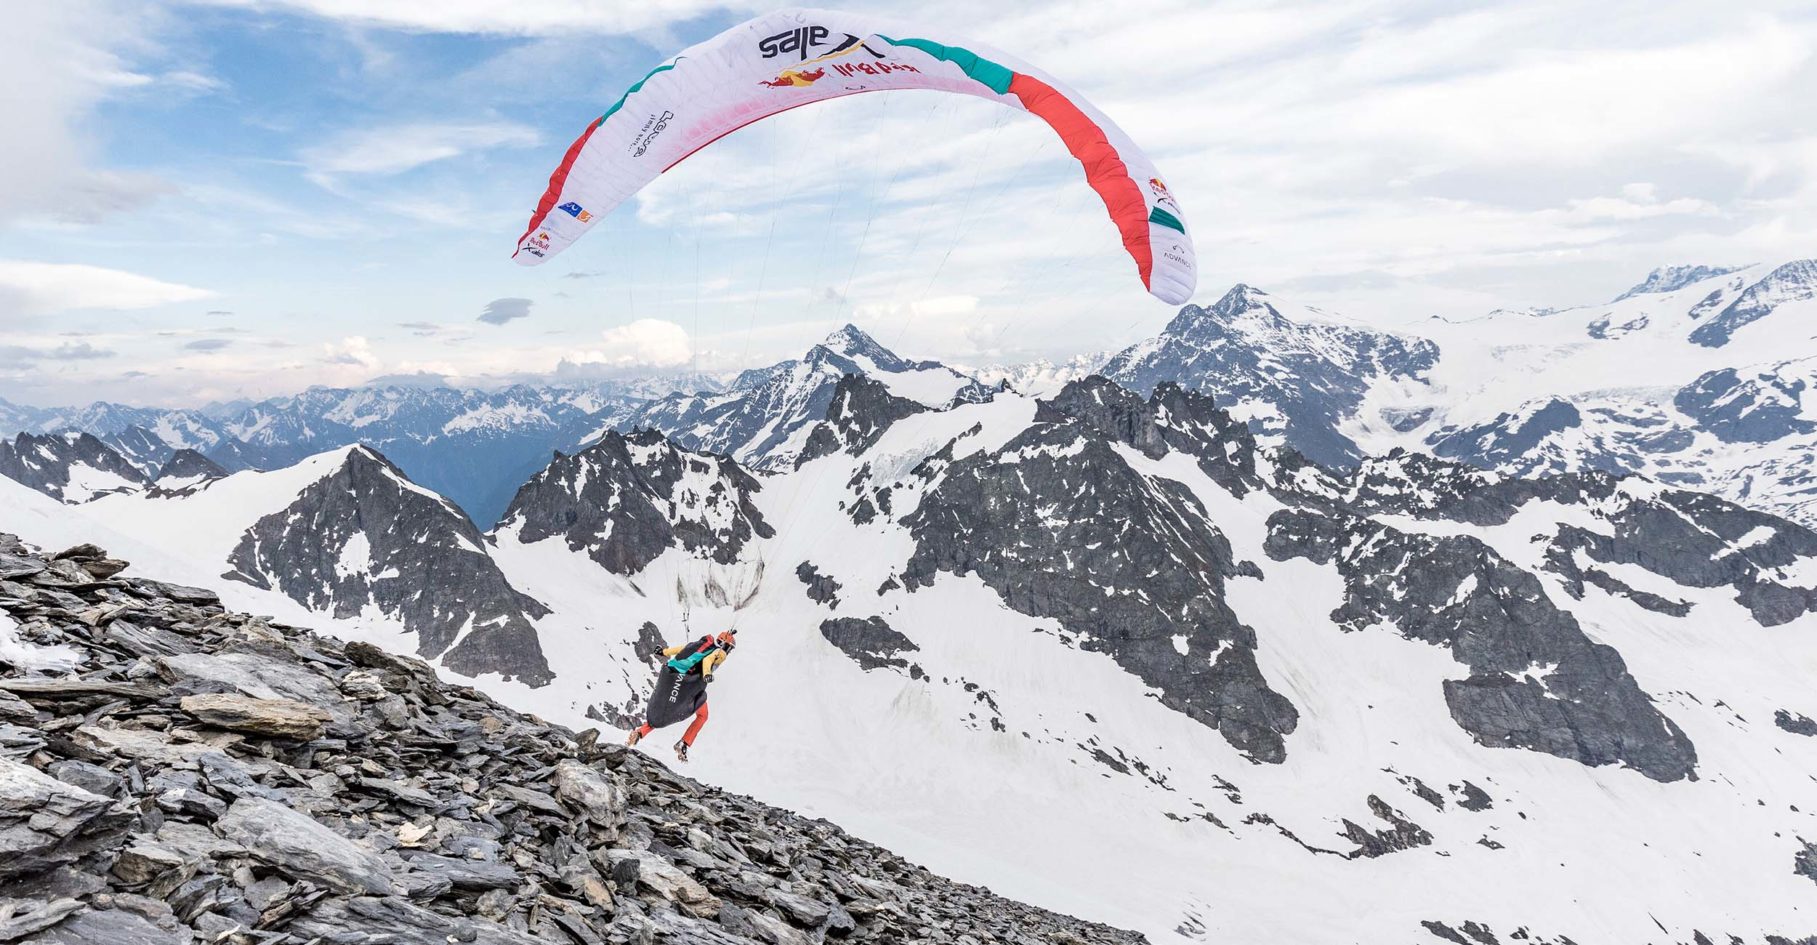 Red Bull X-Alps 2021. Photo: Harald Tauderer/Red Bull Content Pool